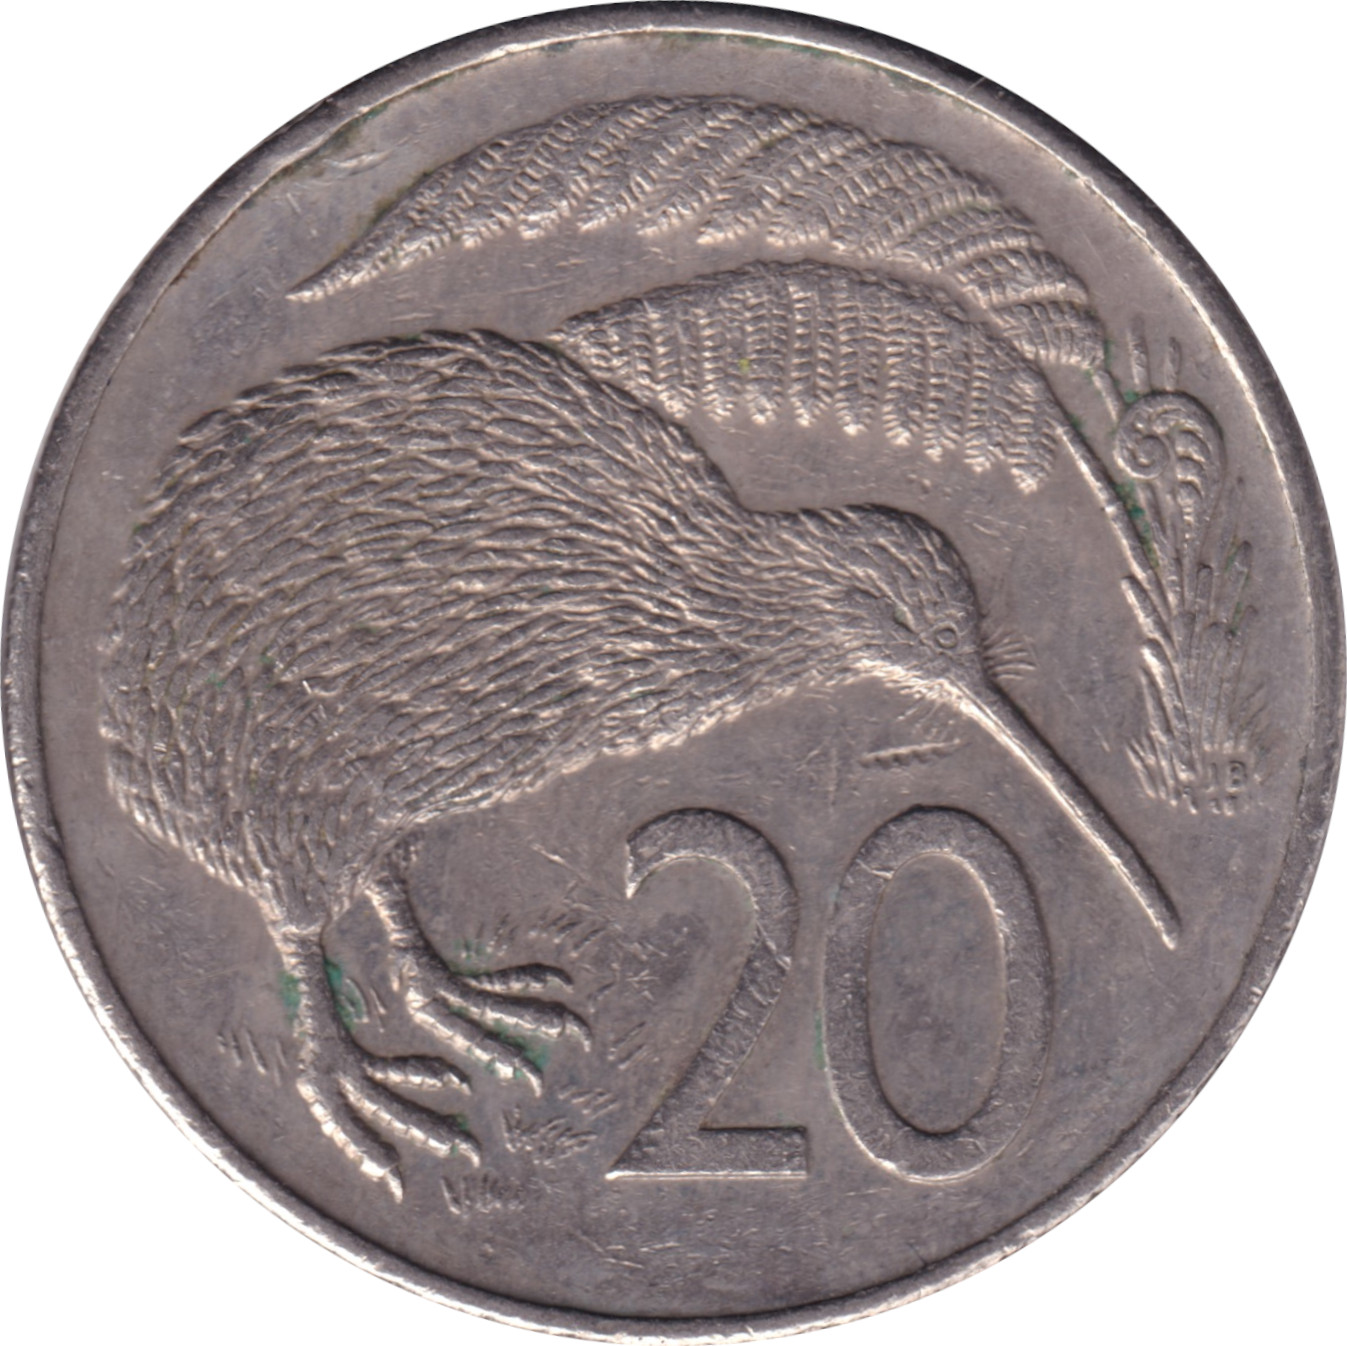 20 cents - Elizabeth II - Young bust